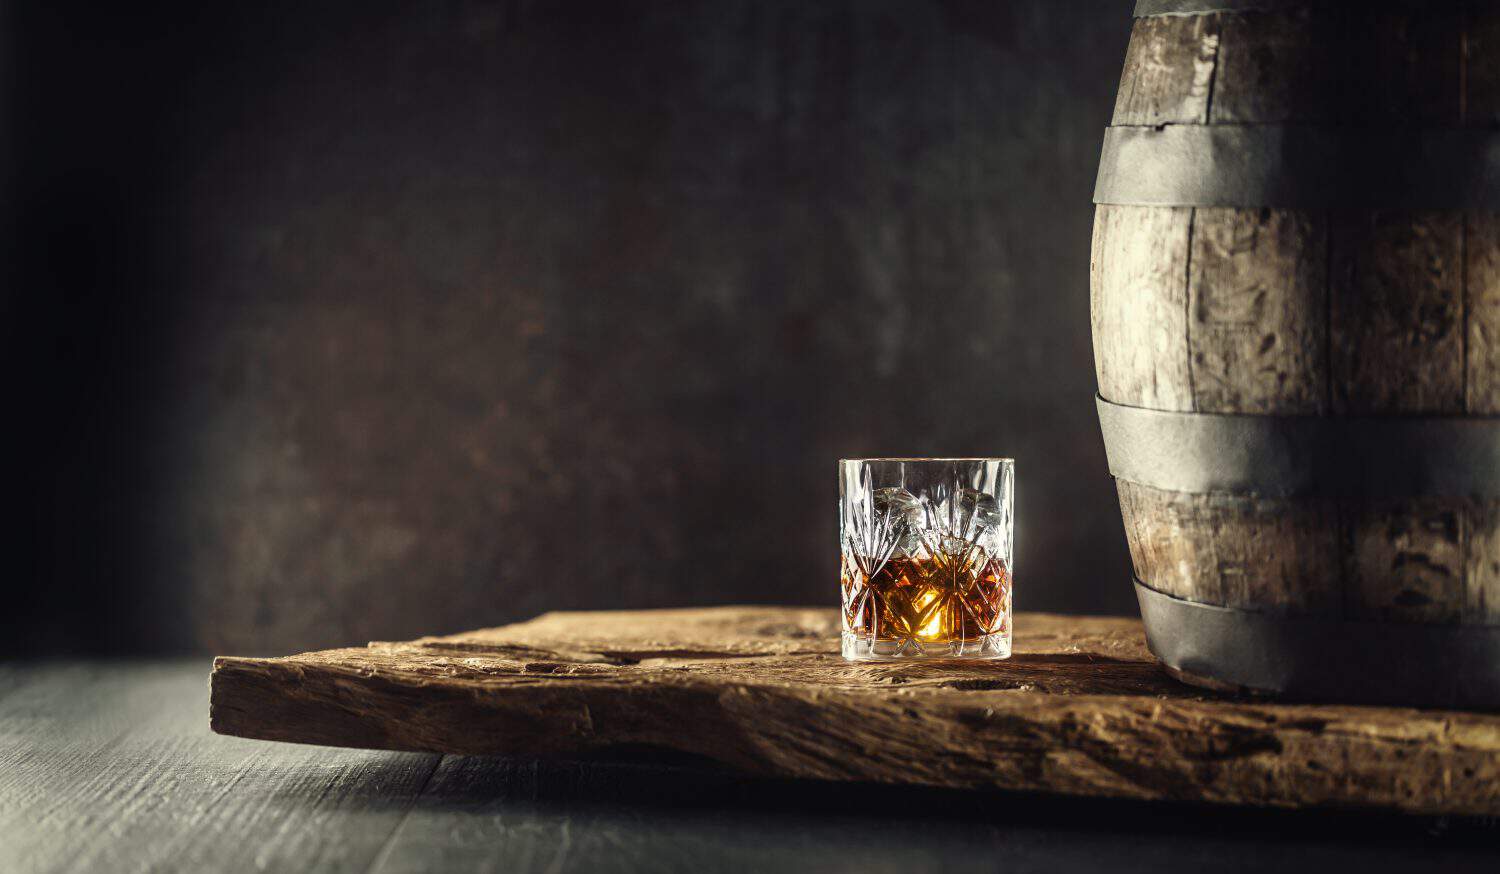 Glass of whisky cognac or bourbon in ornamental glass next to a vinatge wooden barrel on a rustic wood and dark background.